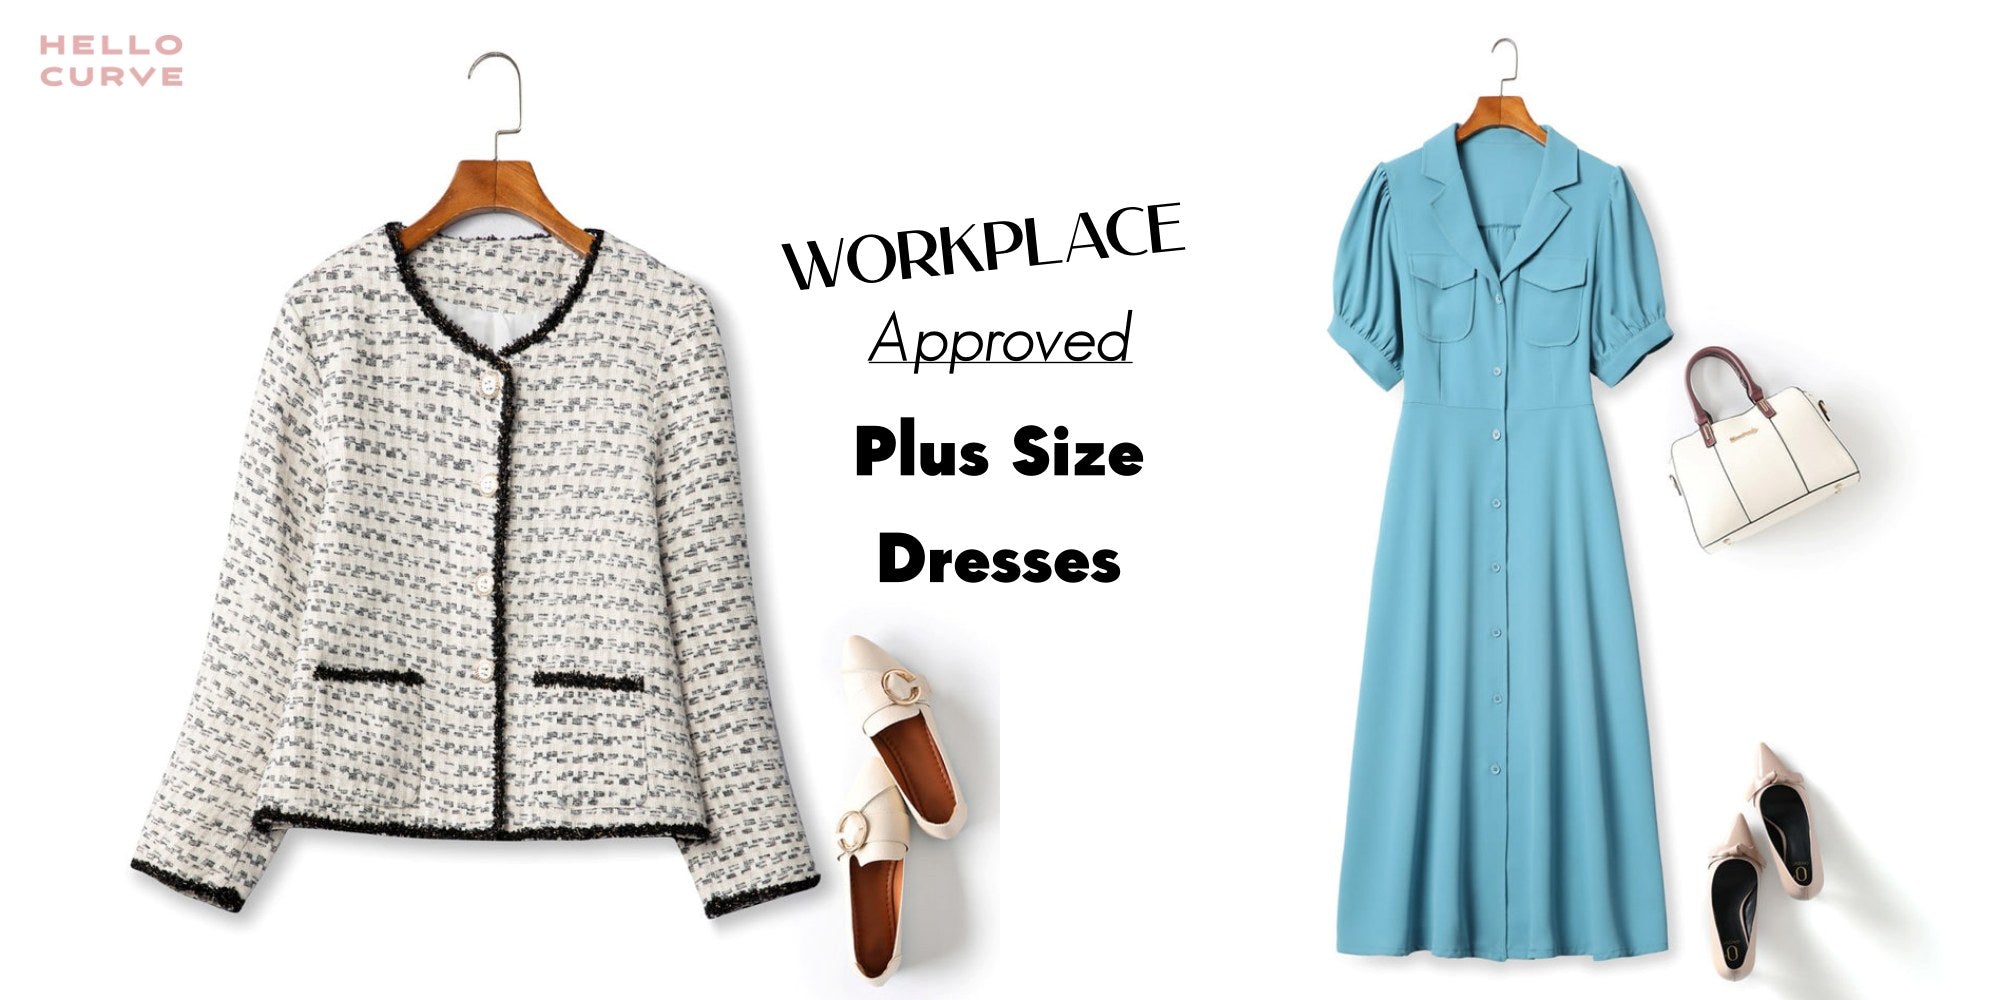 From Desk to Dinner: Navigating the Workday with Stylish Plus Size Dresses